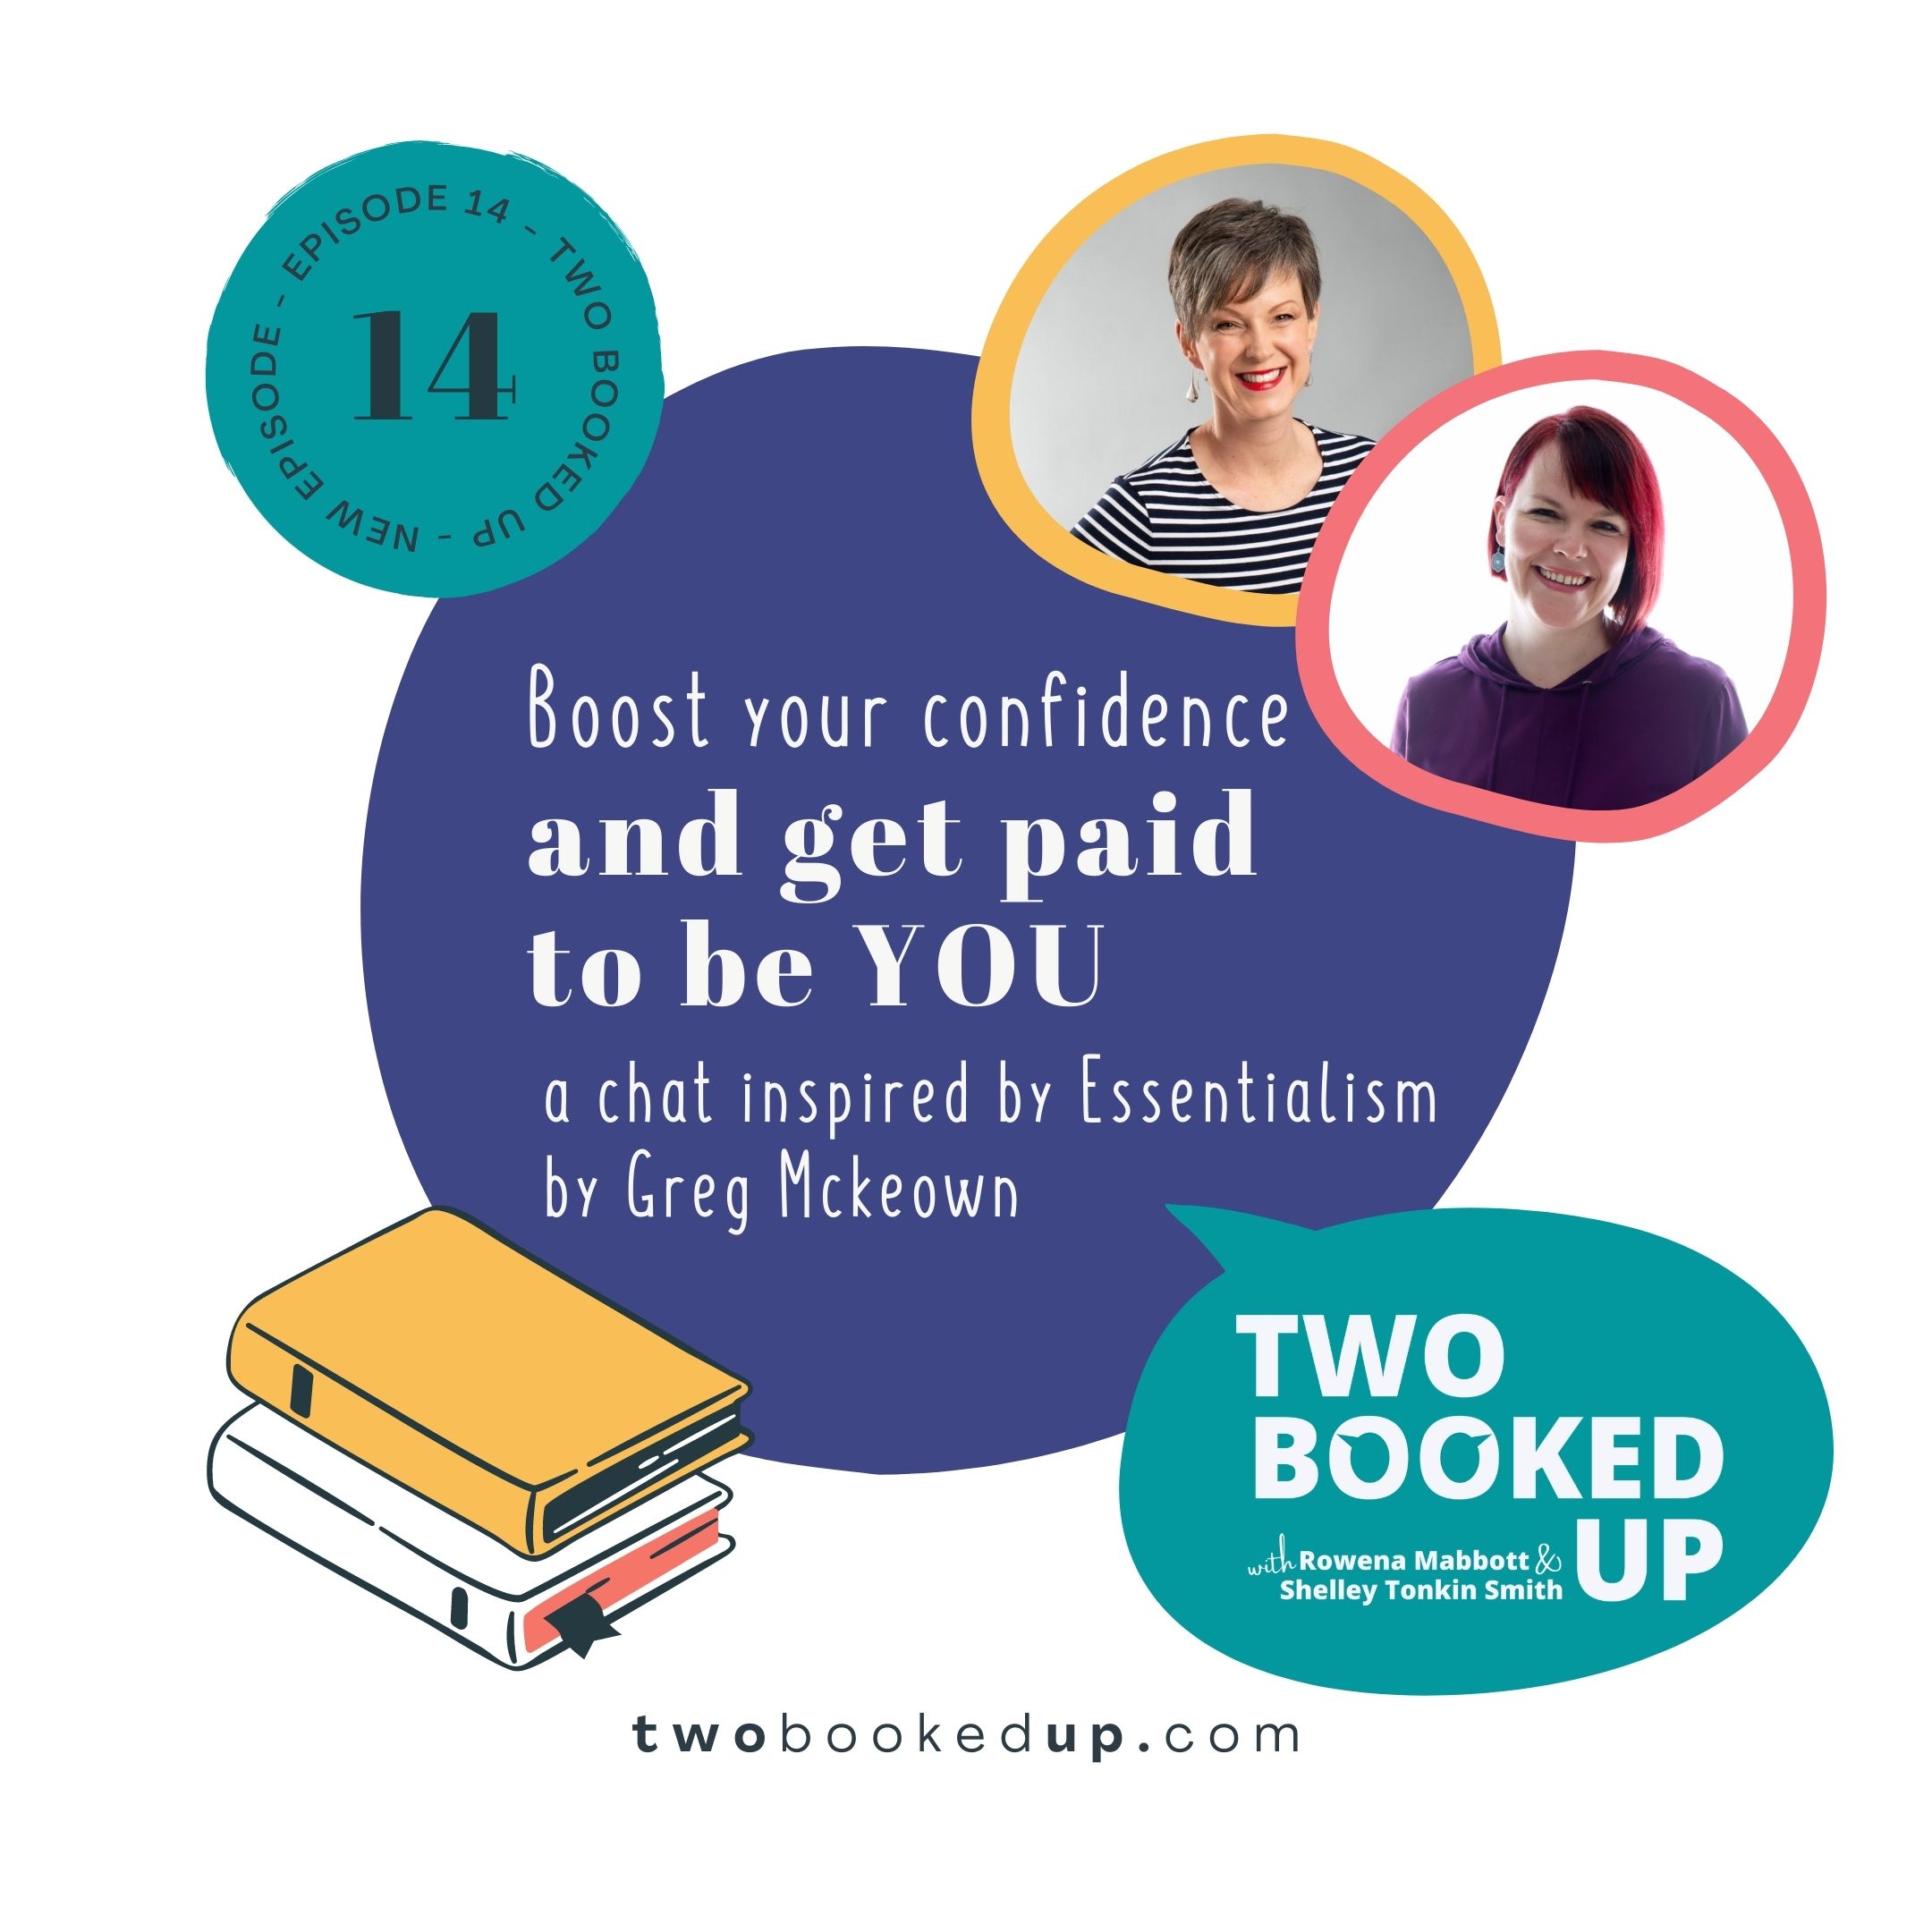 TBU#14 Boost your confidence and get paid to be YOU (inspired by Essentialism by Greg McKeown)